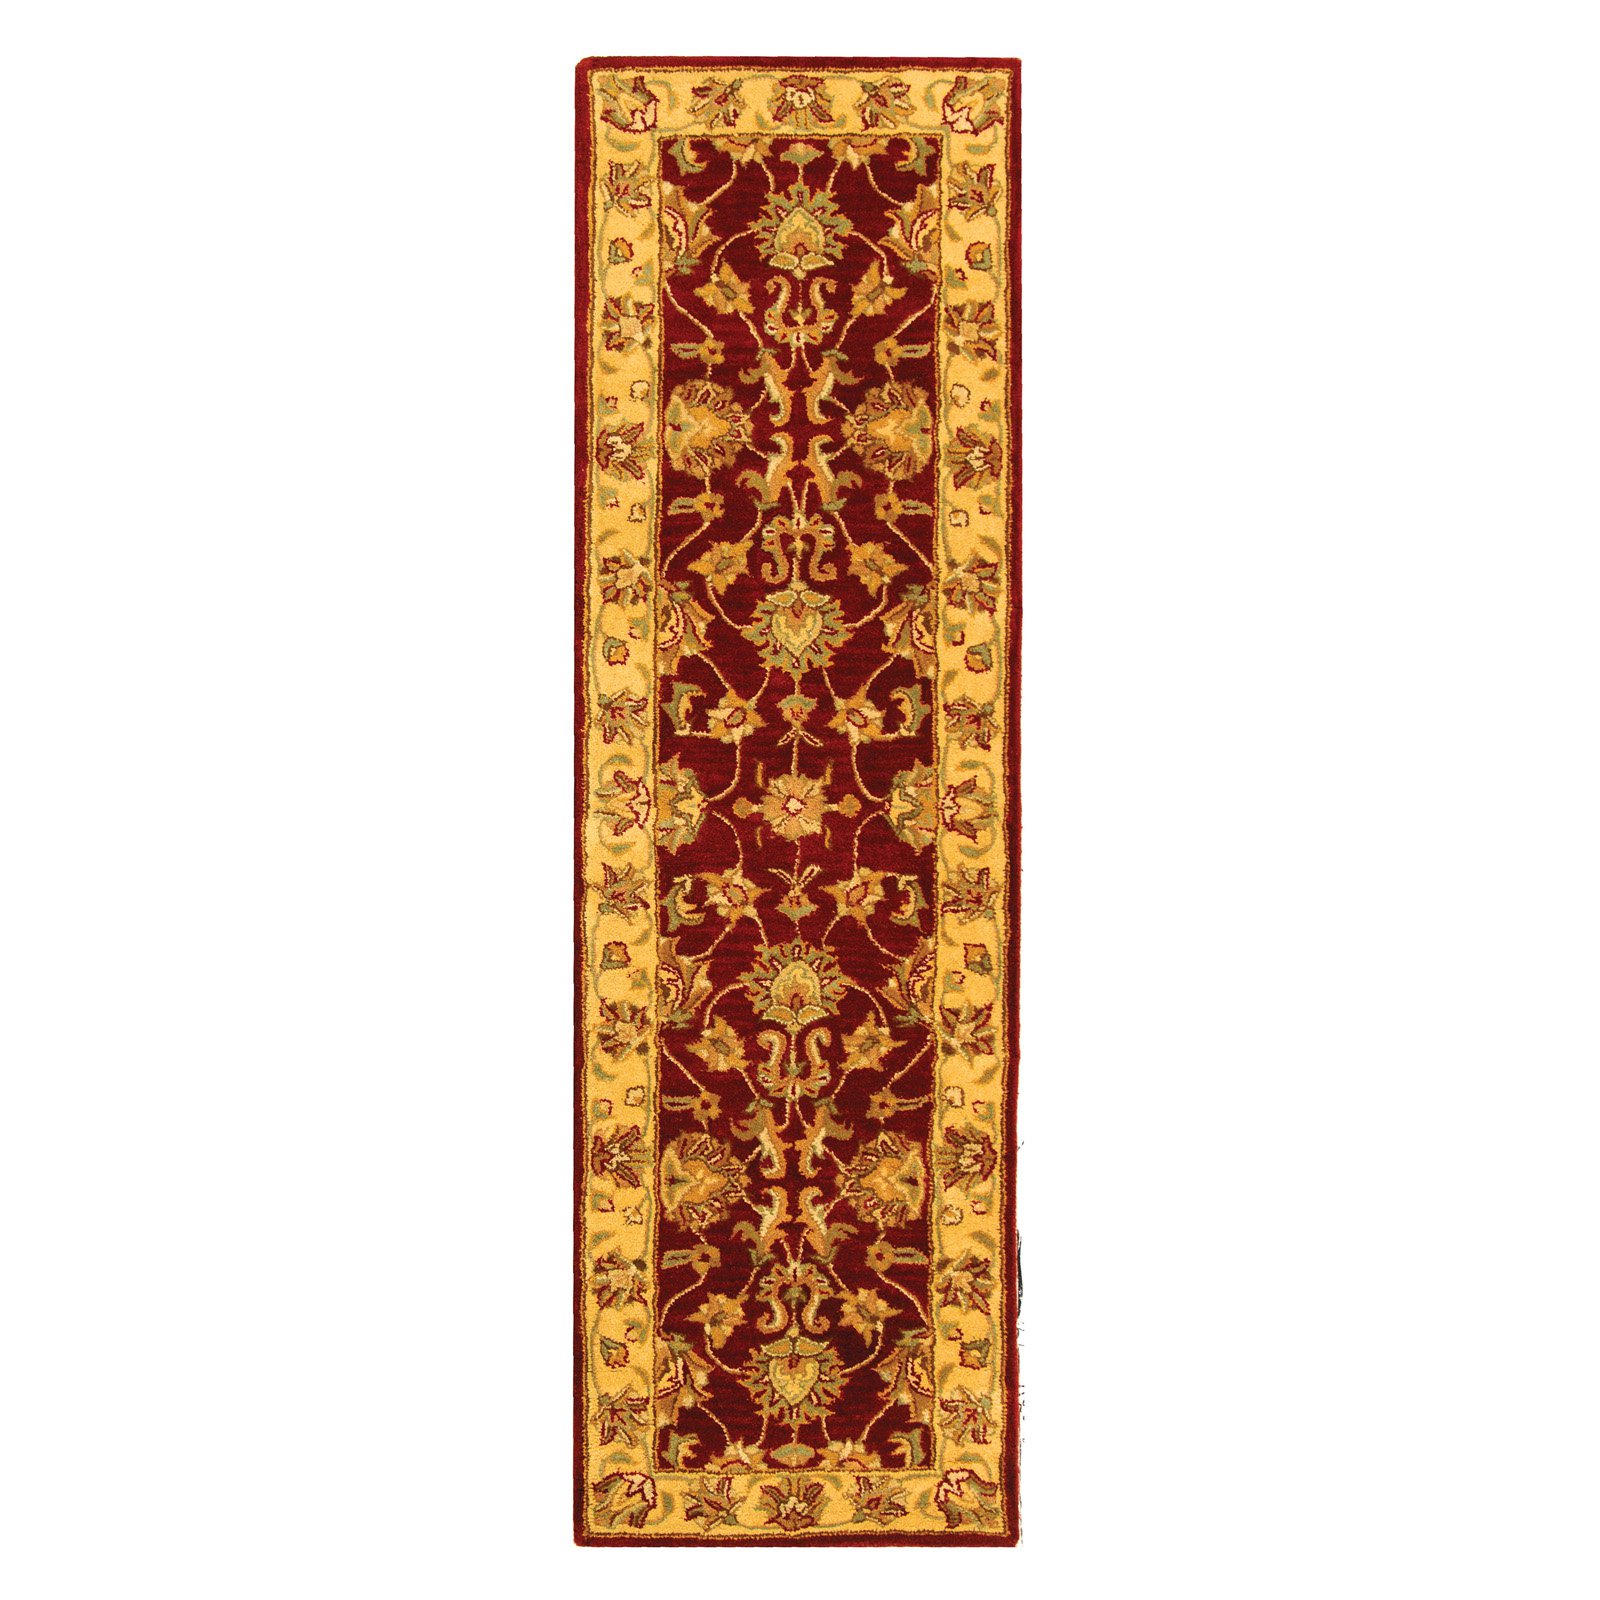 SAFAVIEH Heritage Regis Traditional Wool Area Rug, Red/Gold, 8'3" x 11' - image 3 of 9